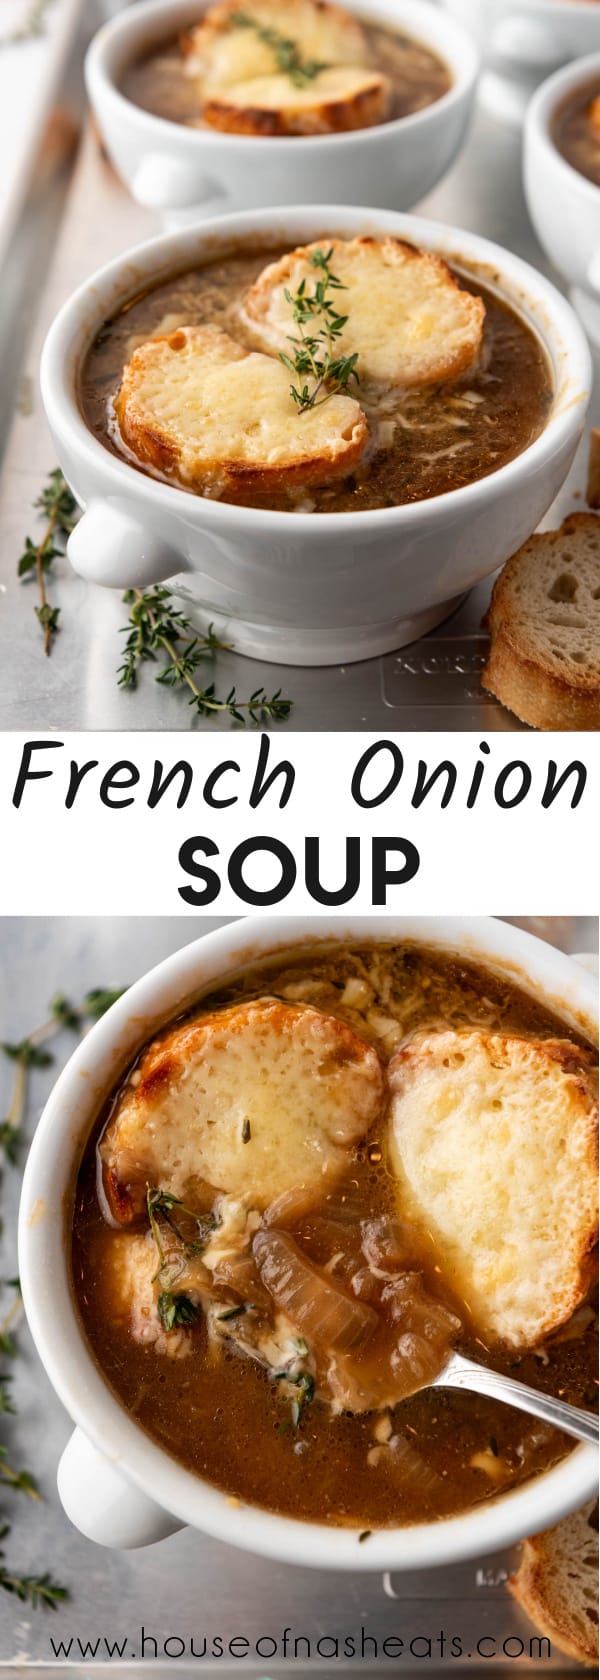 A collage of images of bowls of french onion soup.